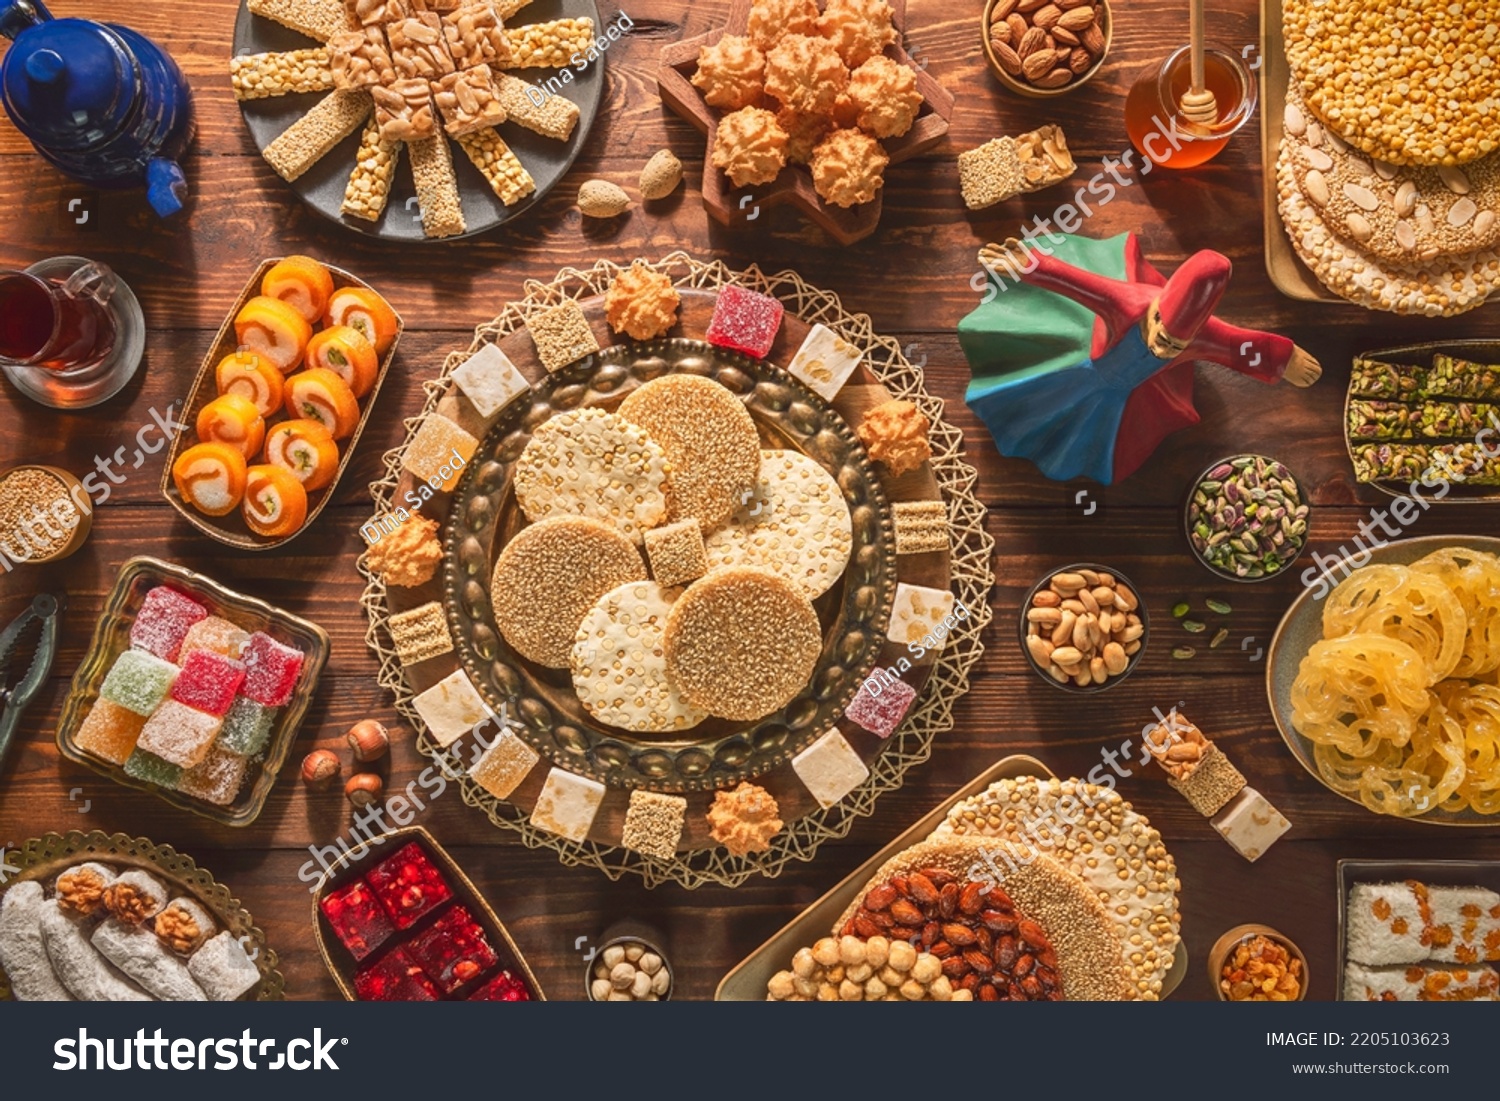 Collection of traditional Arabic sweets and candies to celebrate "Prophet Muhammad's Birthday Event". Varieties of Egyptian Mawlid Sweets or " Halawet Al Mawlid Al Nabawi". #2205103623